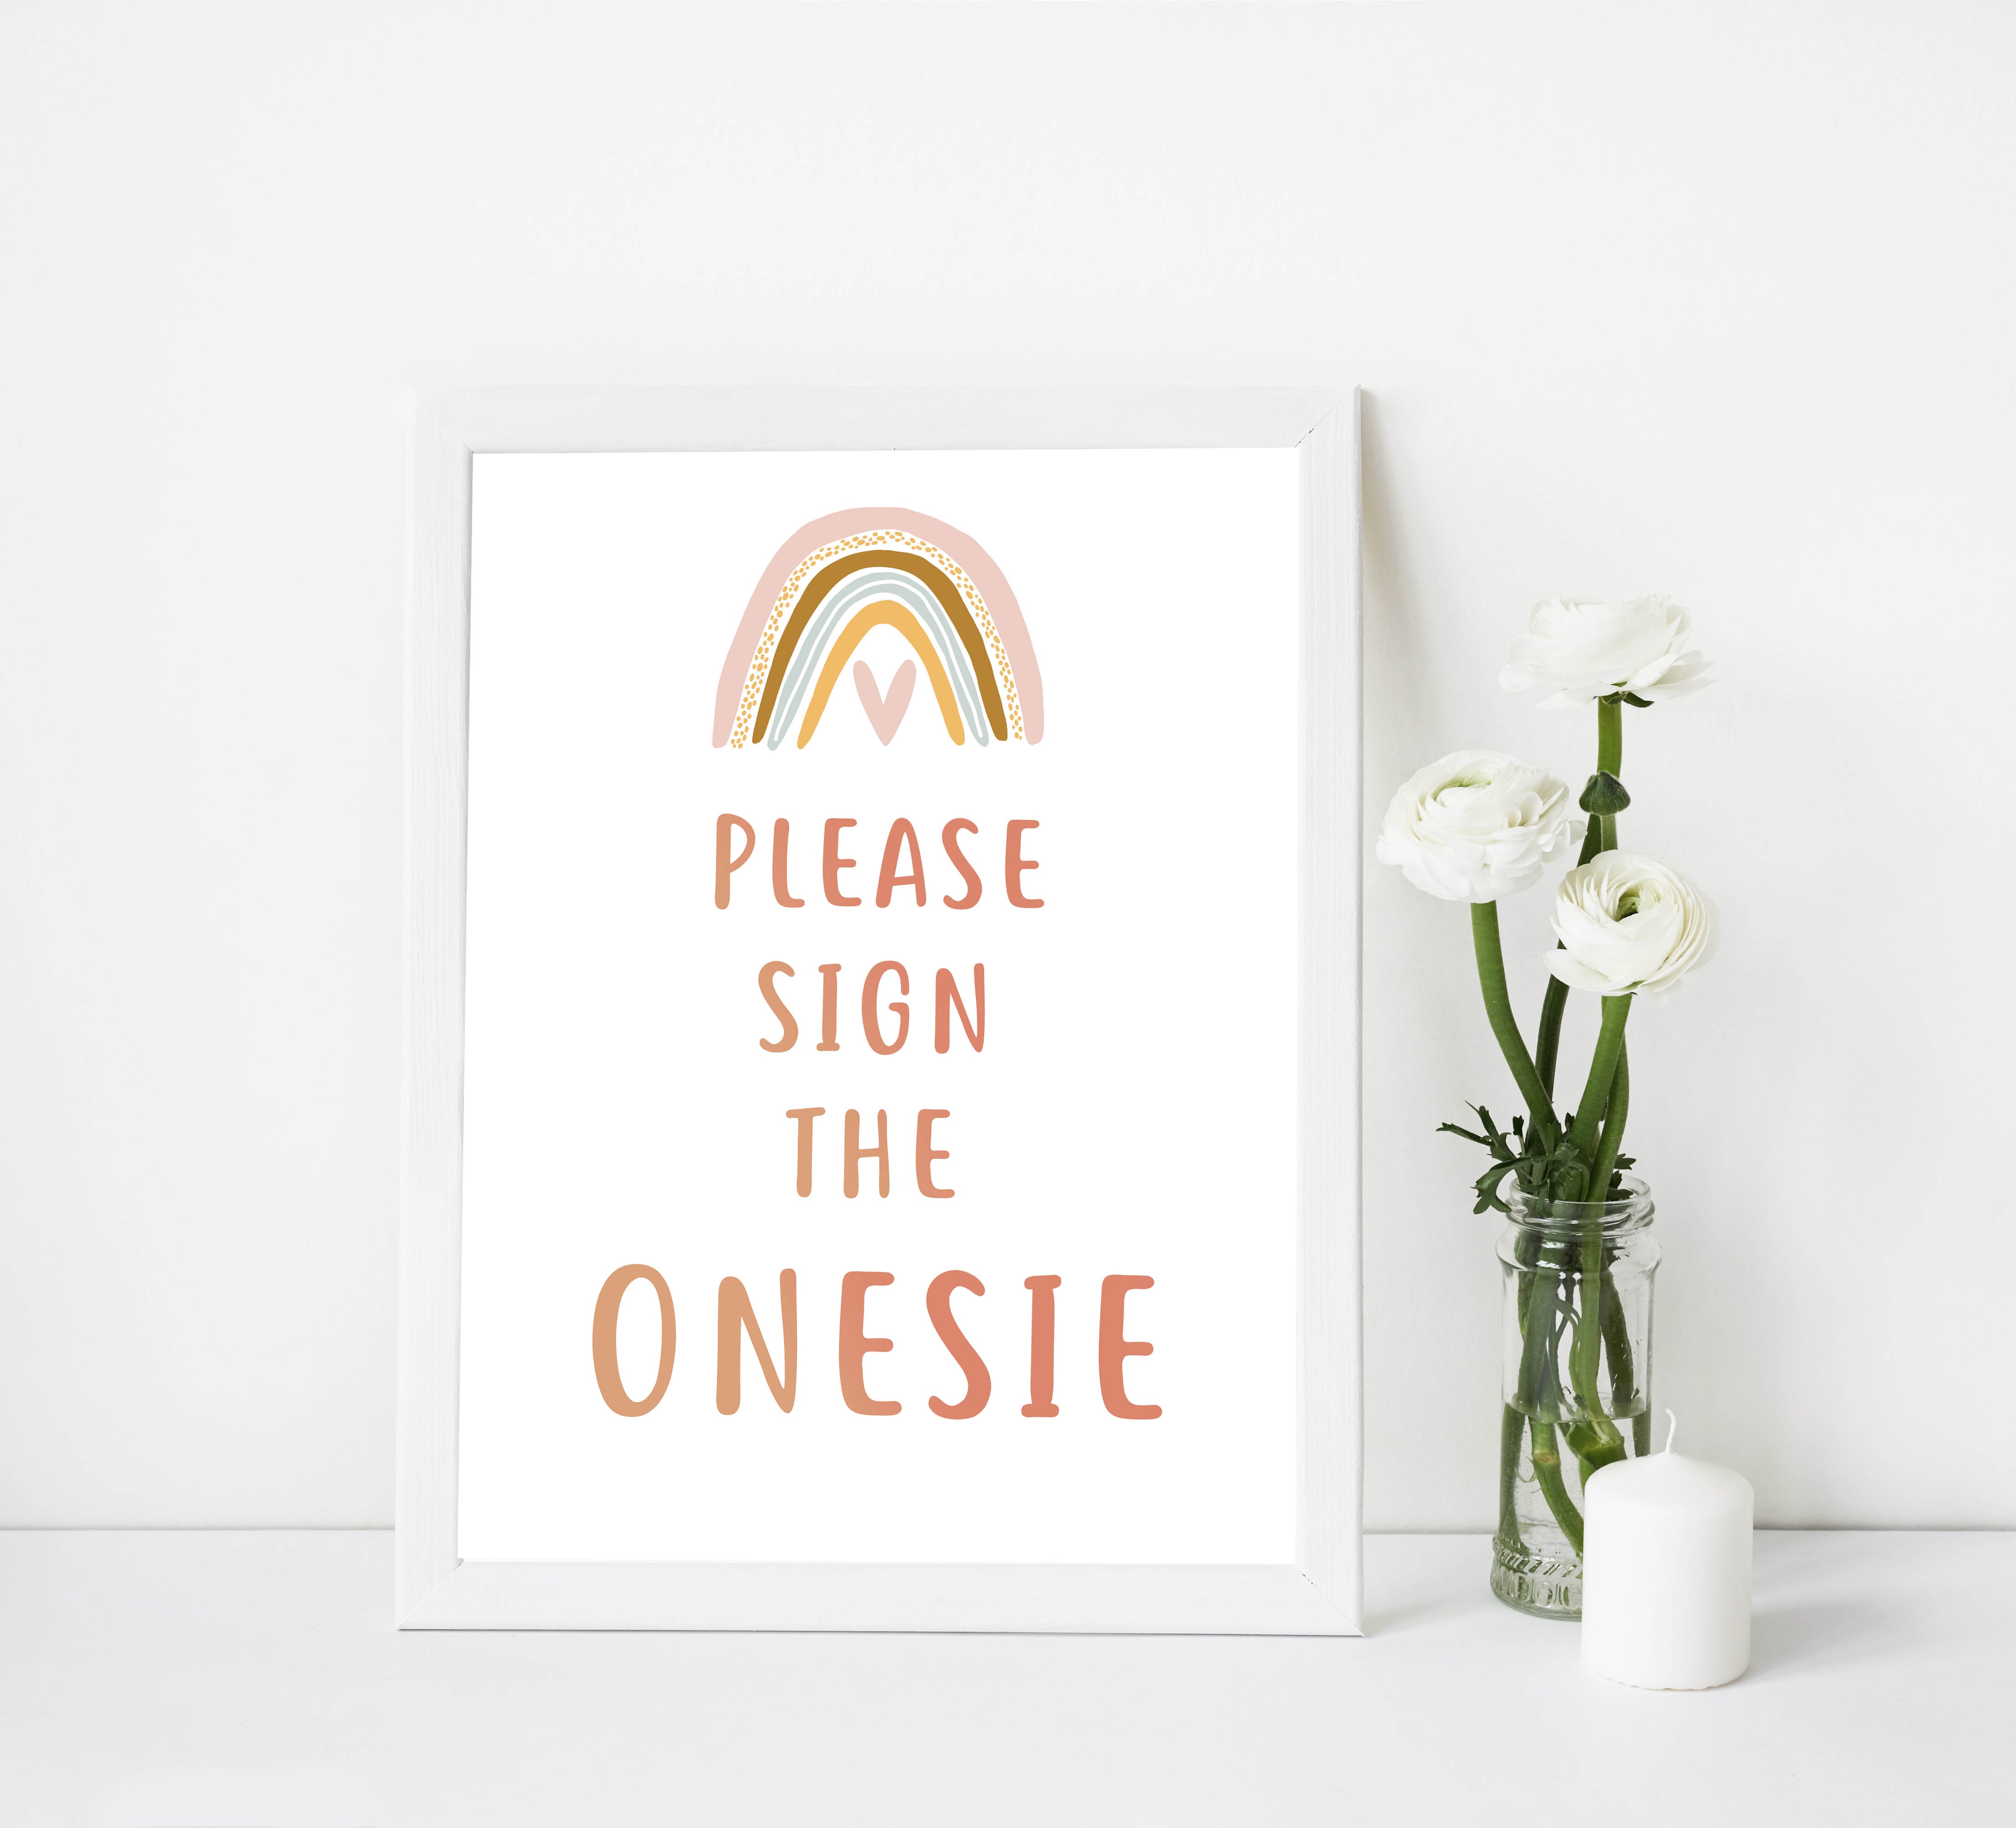 sign the onesie baby game, Printable baby shower games, boho rainbow baby games, baby shower games, fun baby shower ideas, top baby shower ideas, boho rainbow baby shower, baby shower games, fun boho rainbow baby shower ideas